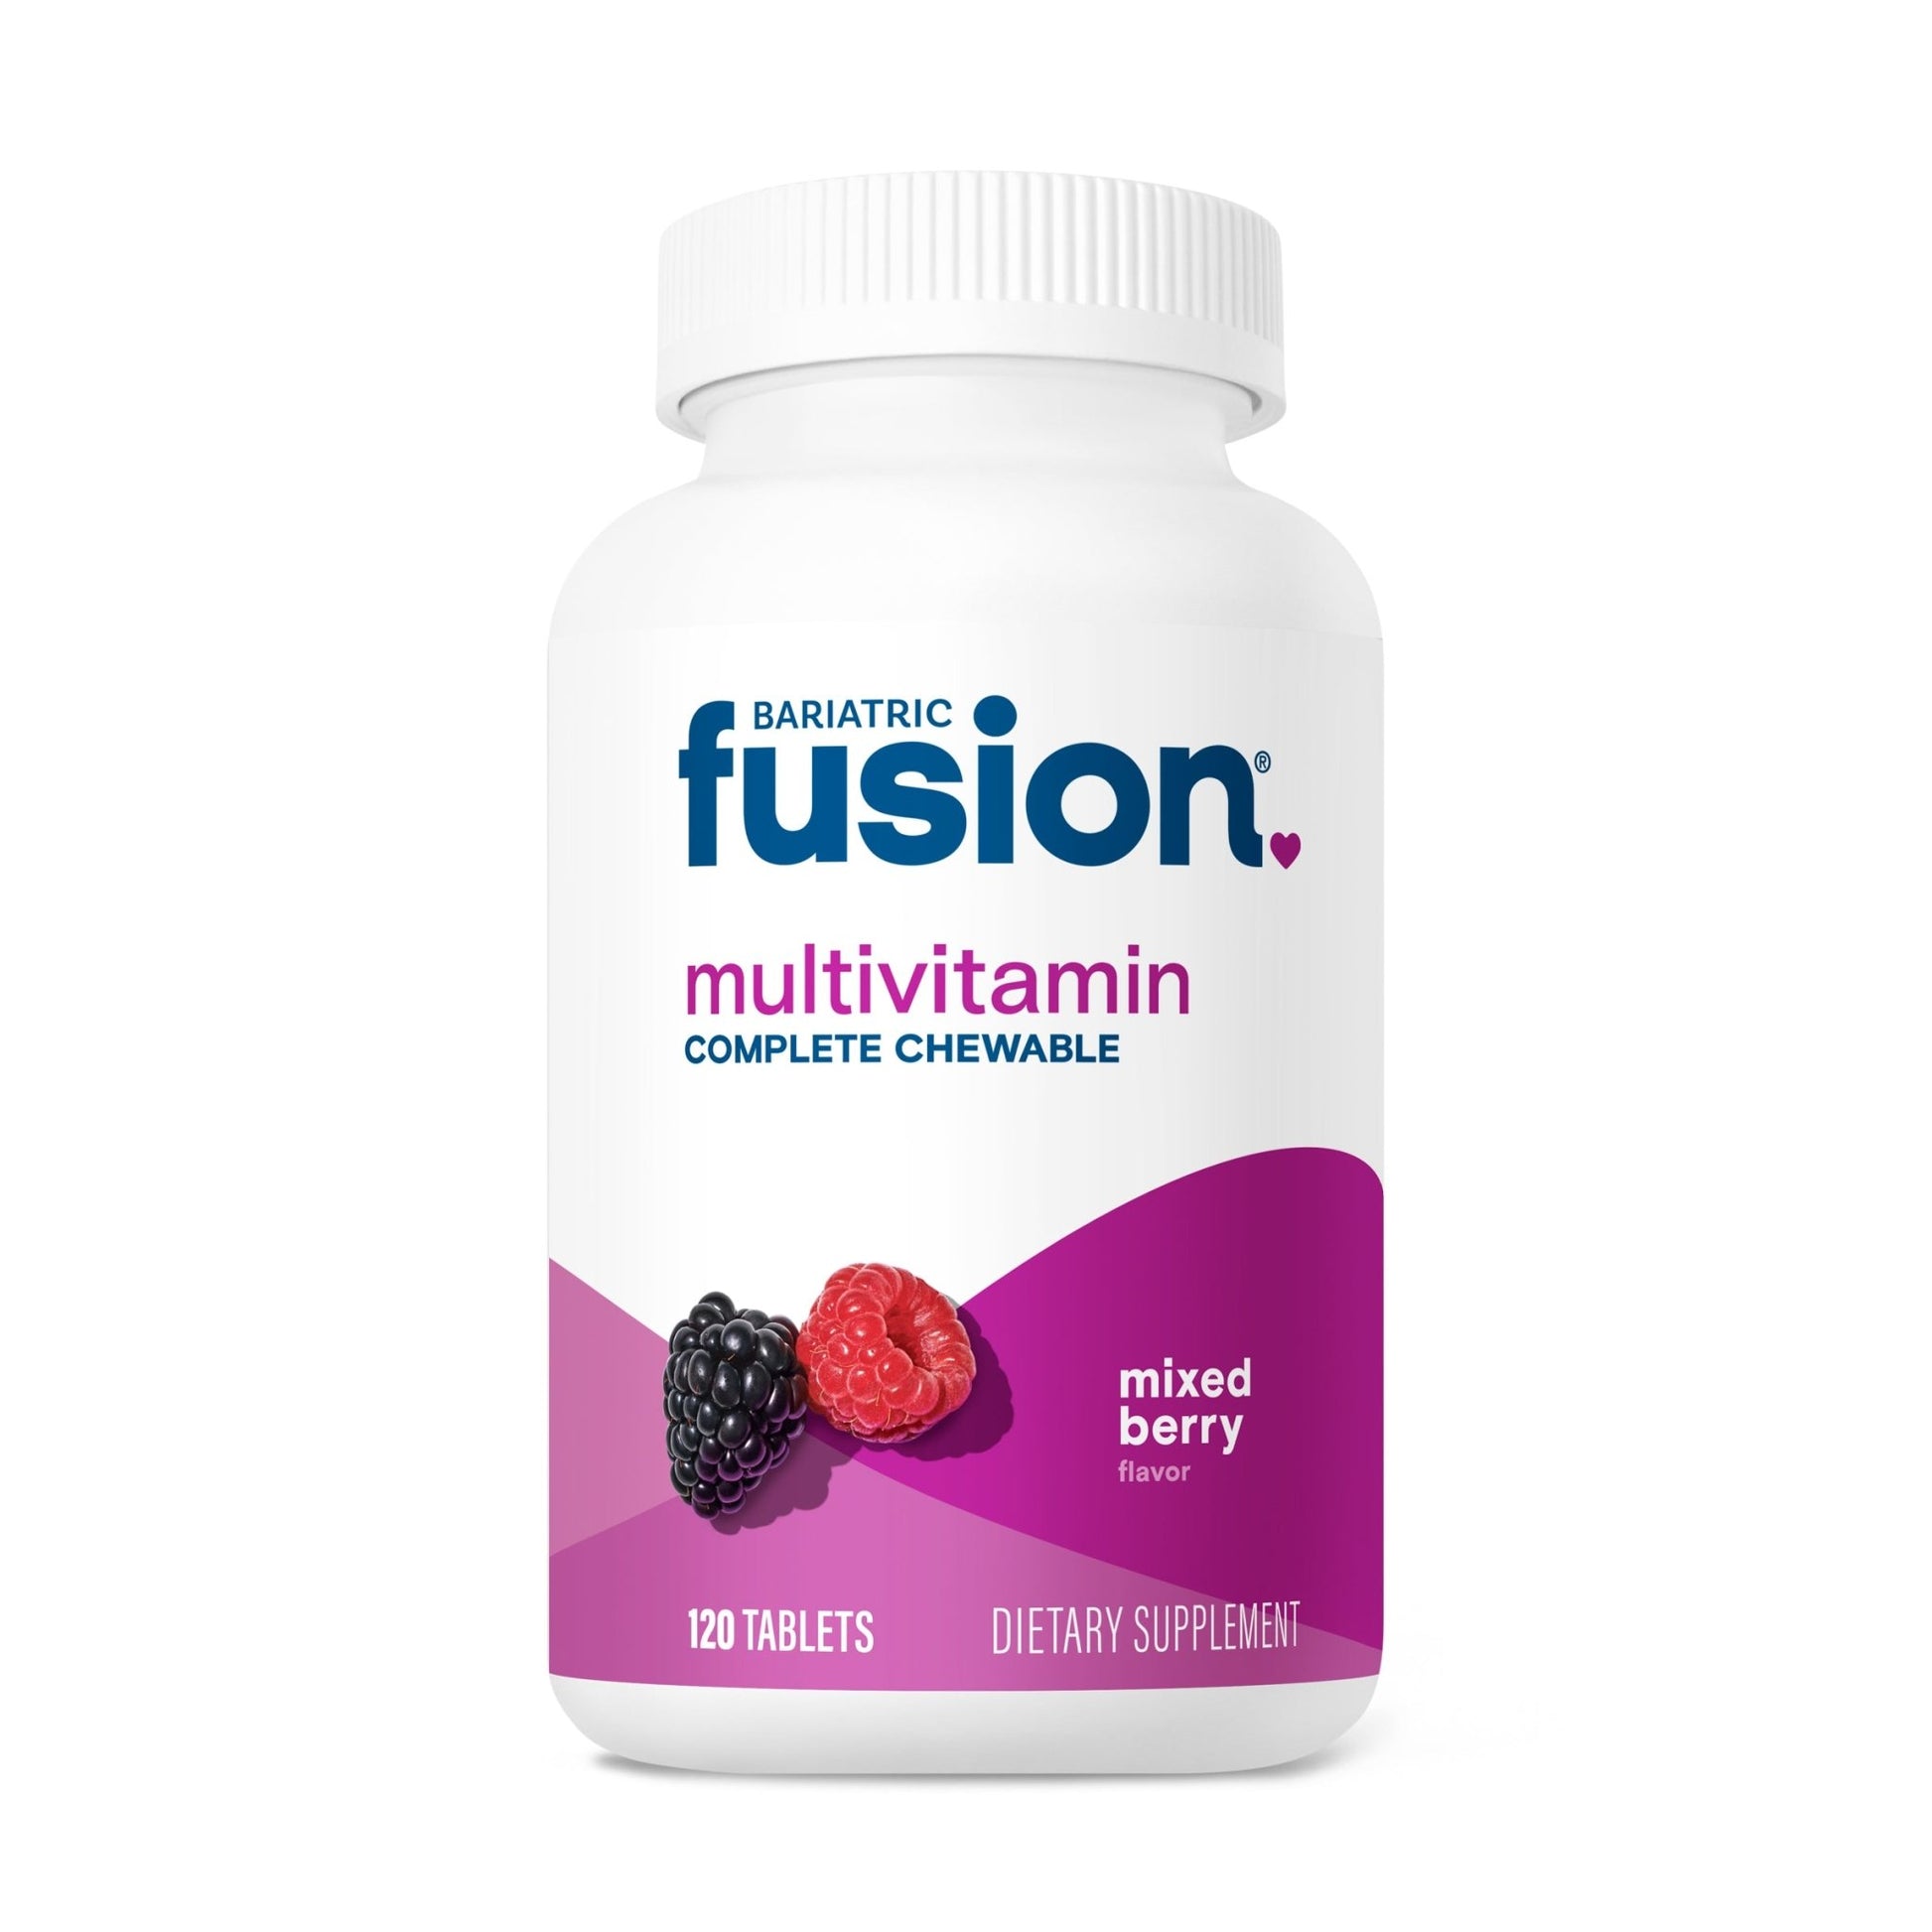 Bariatric Fusion Mixed Berry Complete Chewable Bariatric Multivitamin.